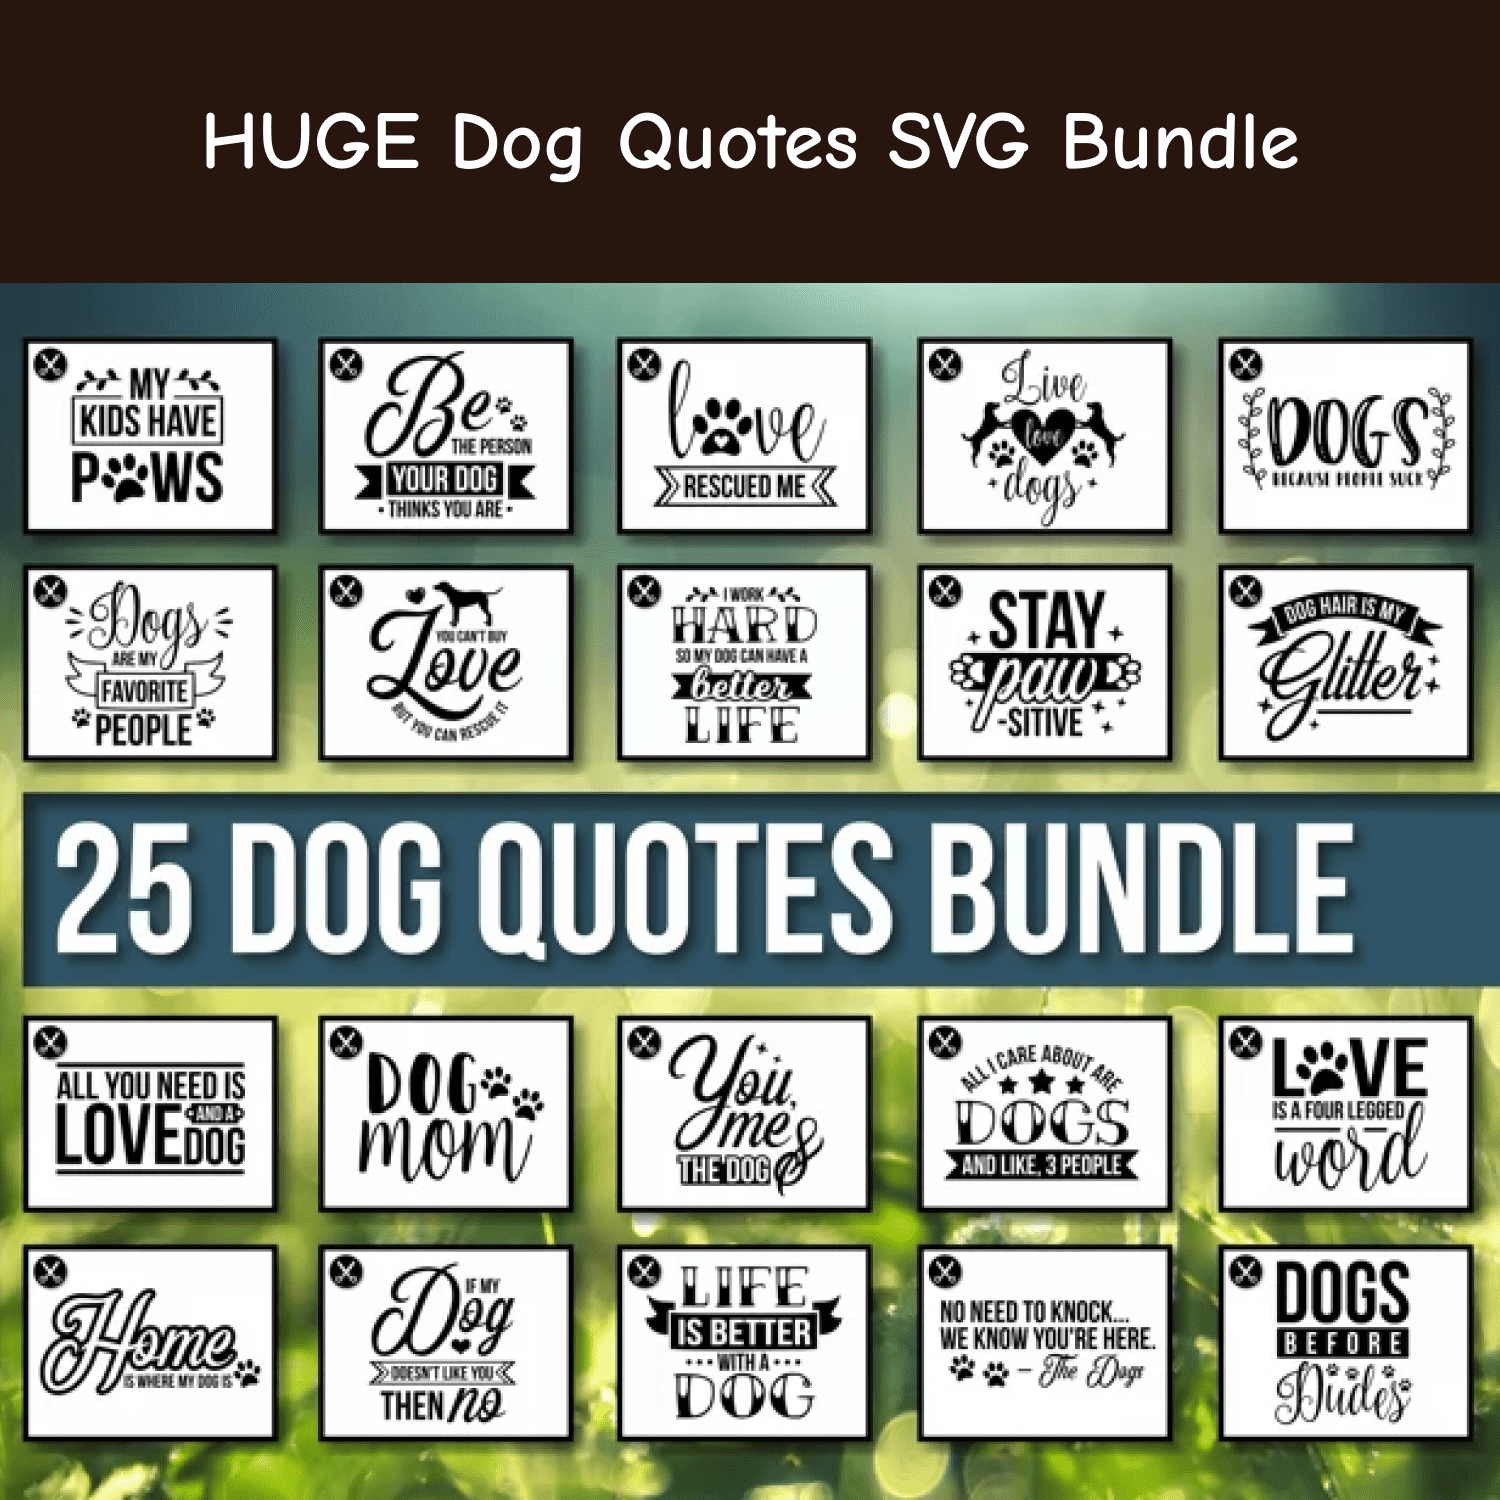 The 25 dog quotes bundle is shown in black and white.